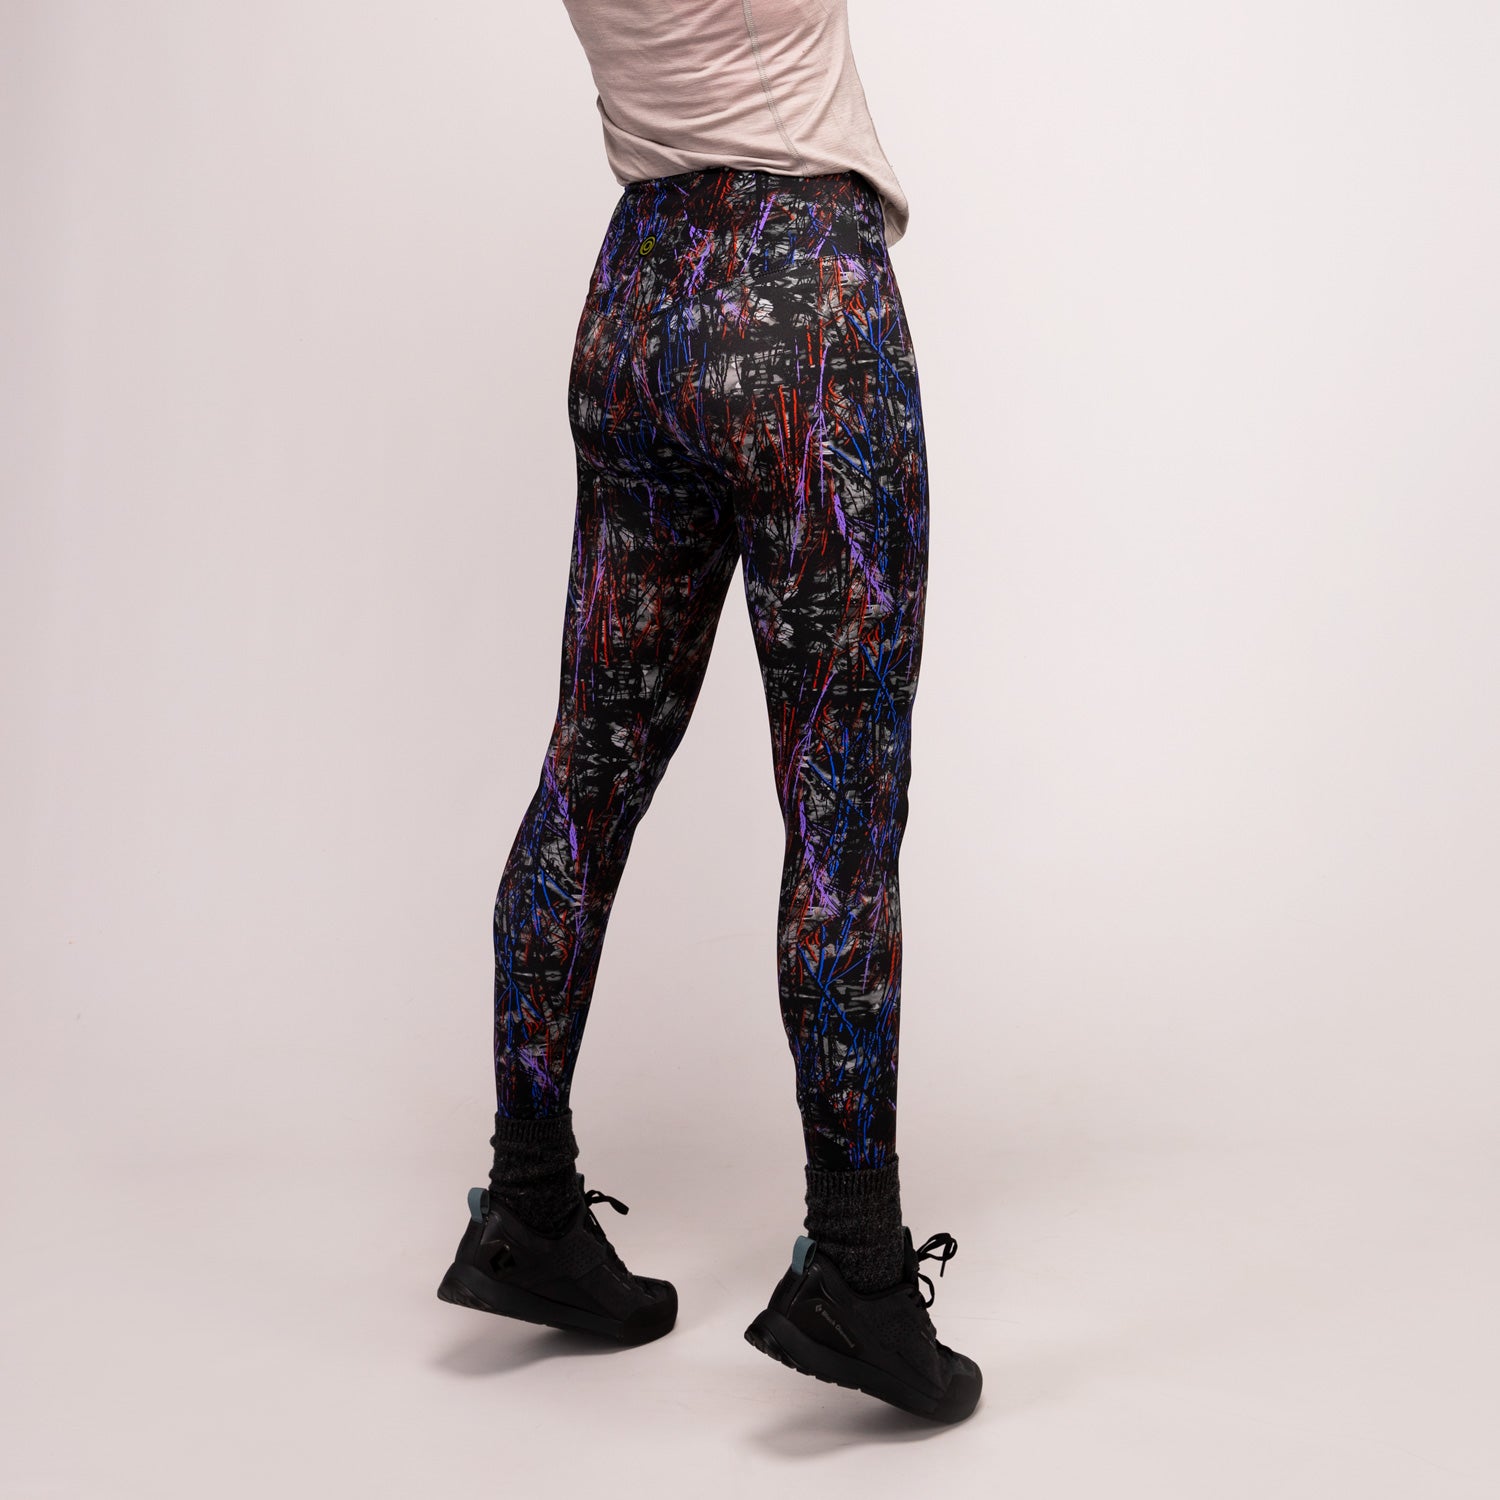 10 Flared Yoga Pants at Every Price Point - Parade: Entertainment, Recipes,  Health, Life, Holidays